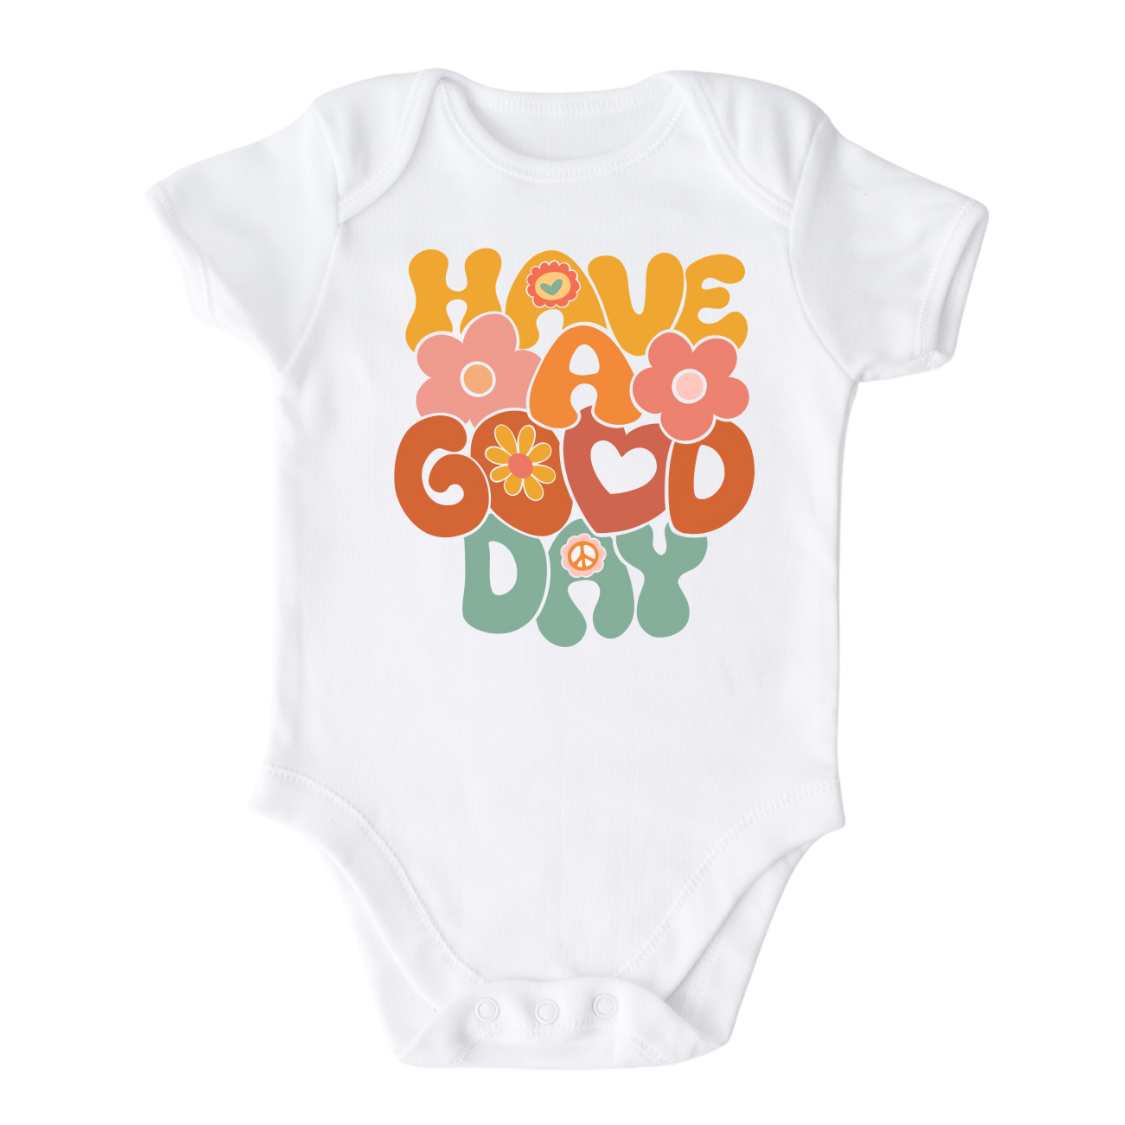 Cute Shirt Baby Onesie® Have A Good Day Baby Shower Gift Newborn Clothes